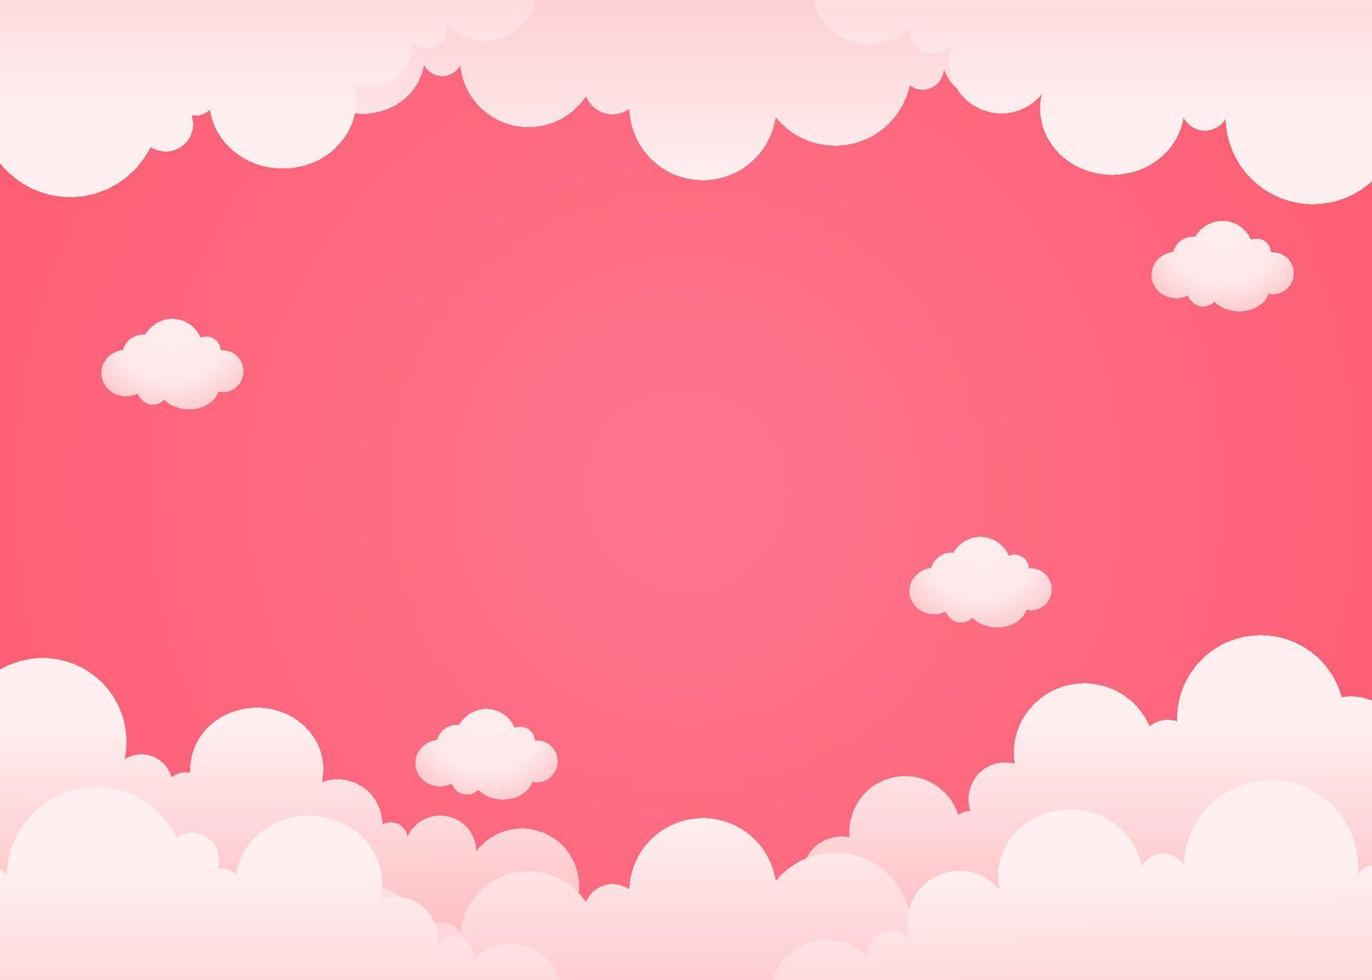 pink background with clouds illustration for valentines day celebration and greeting card vector